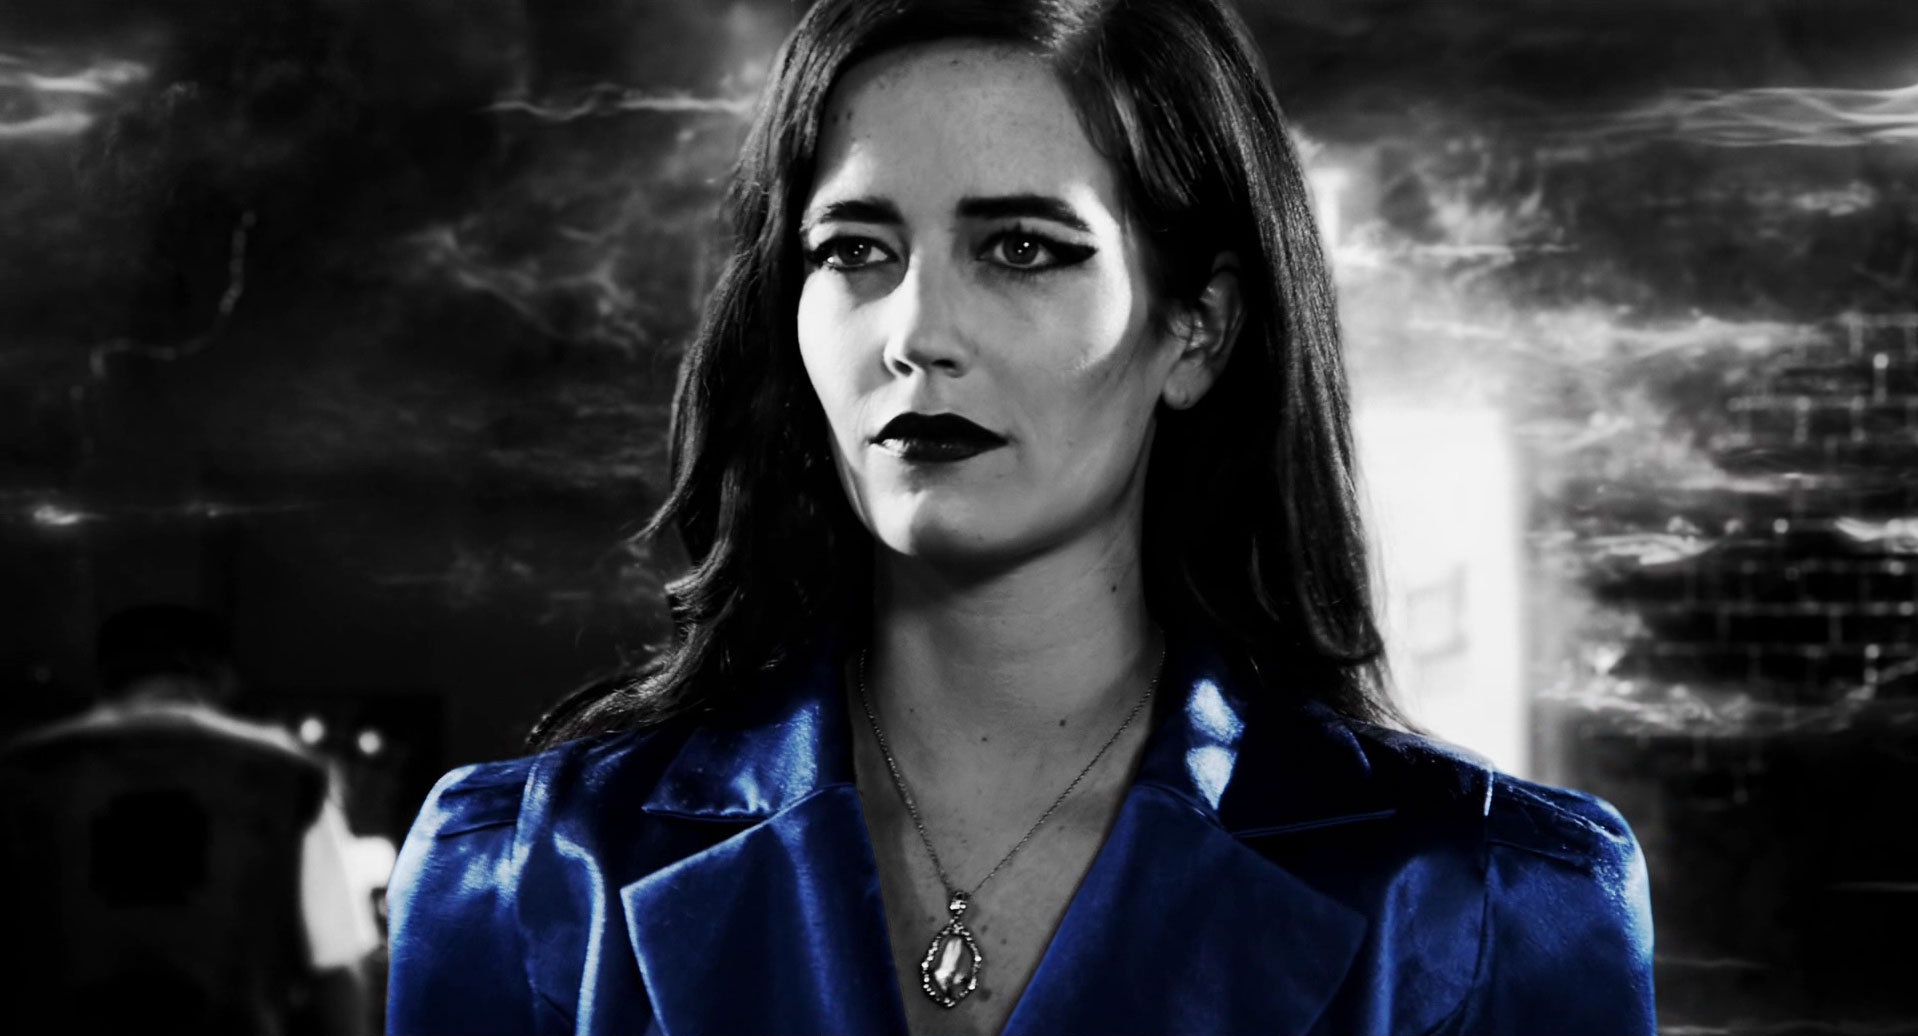 Eva Green in Sin City: A Dame to Kill For